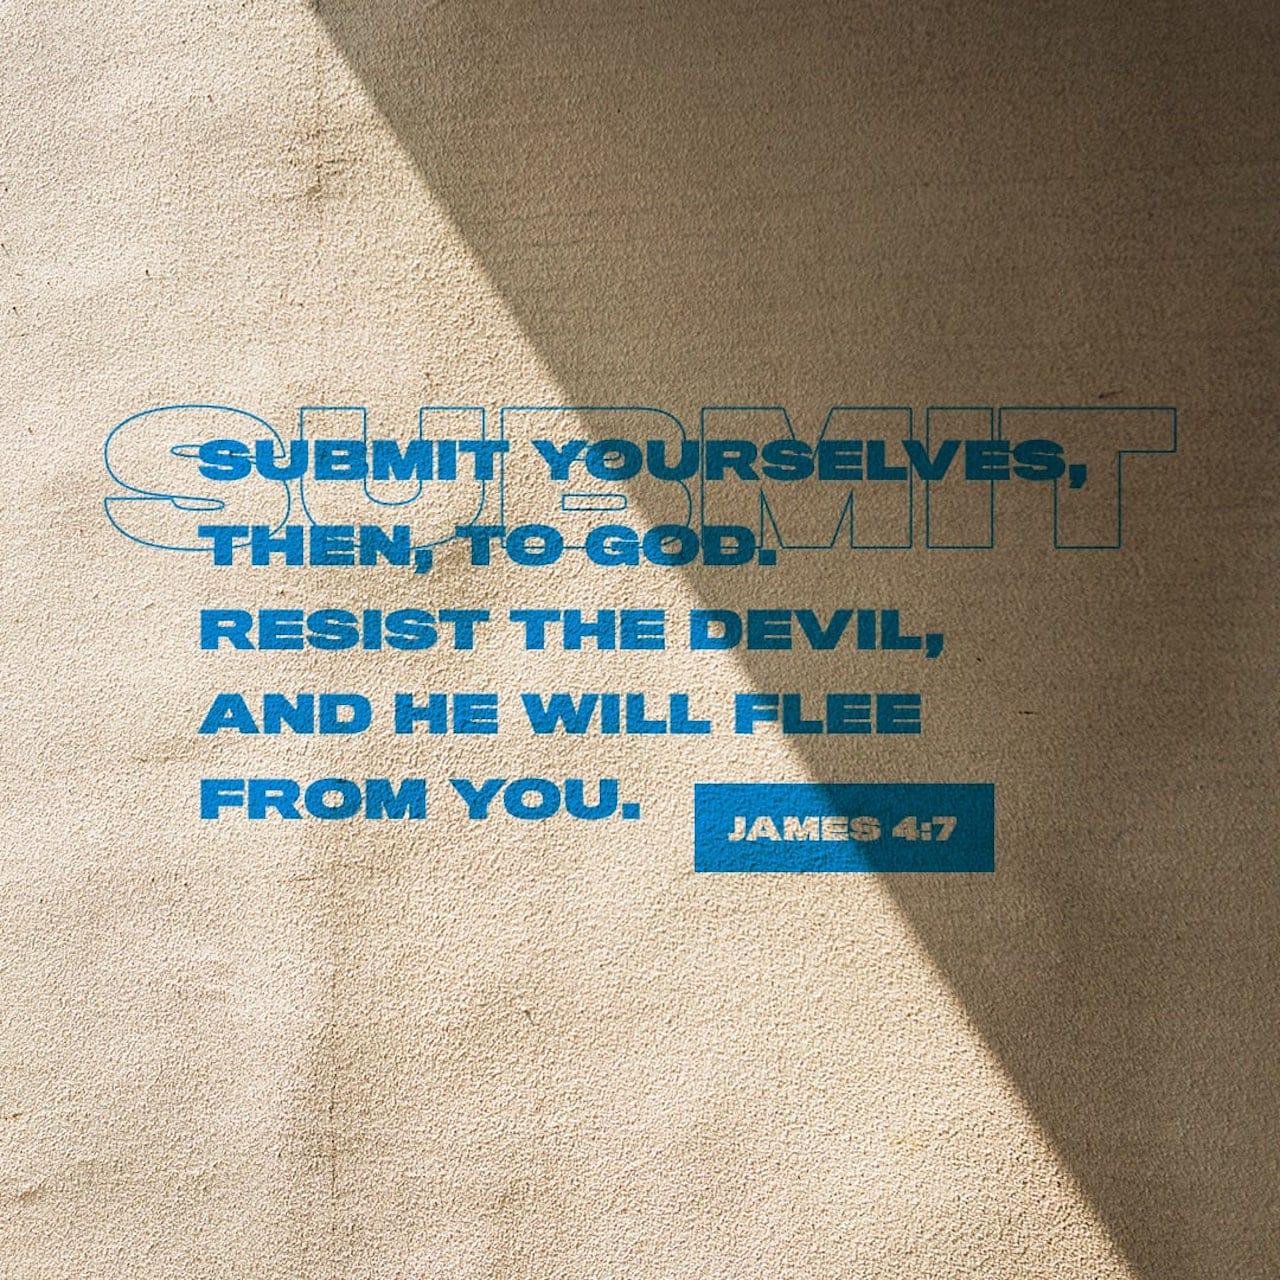 Bible Verse of the Day - day 149 - image 46343 (James 4:7)